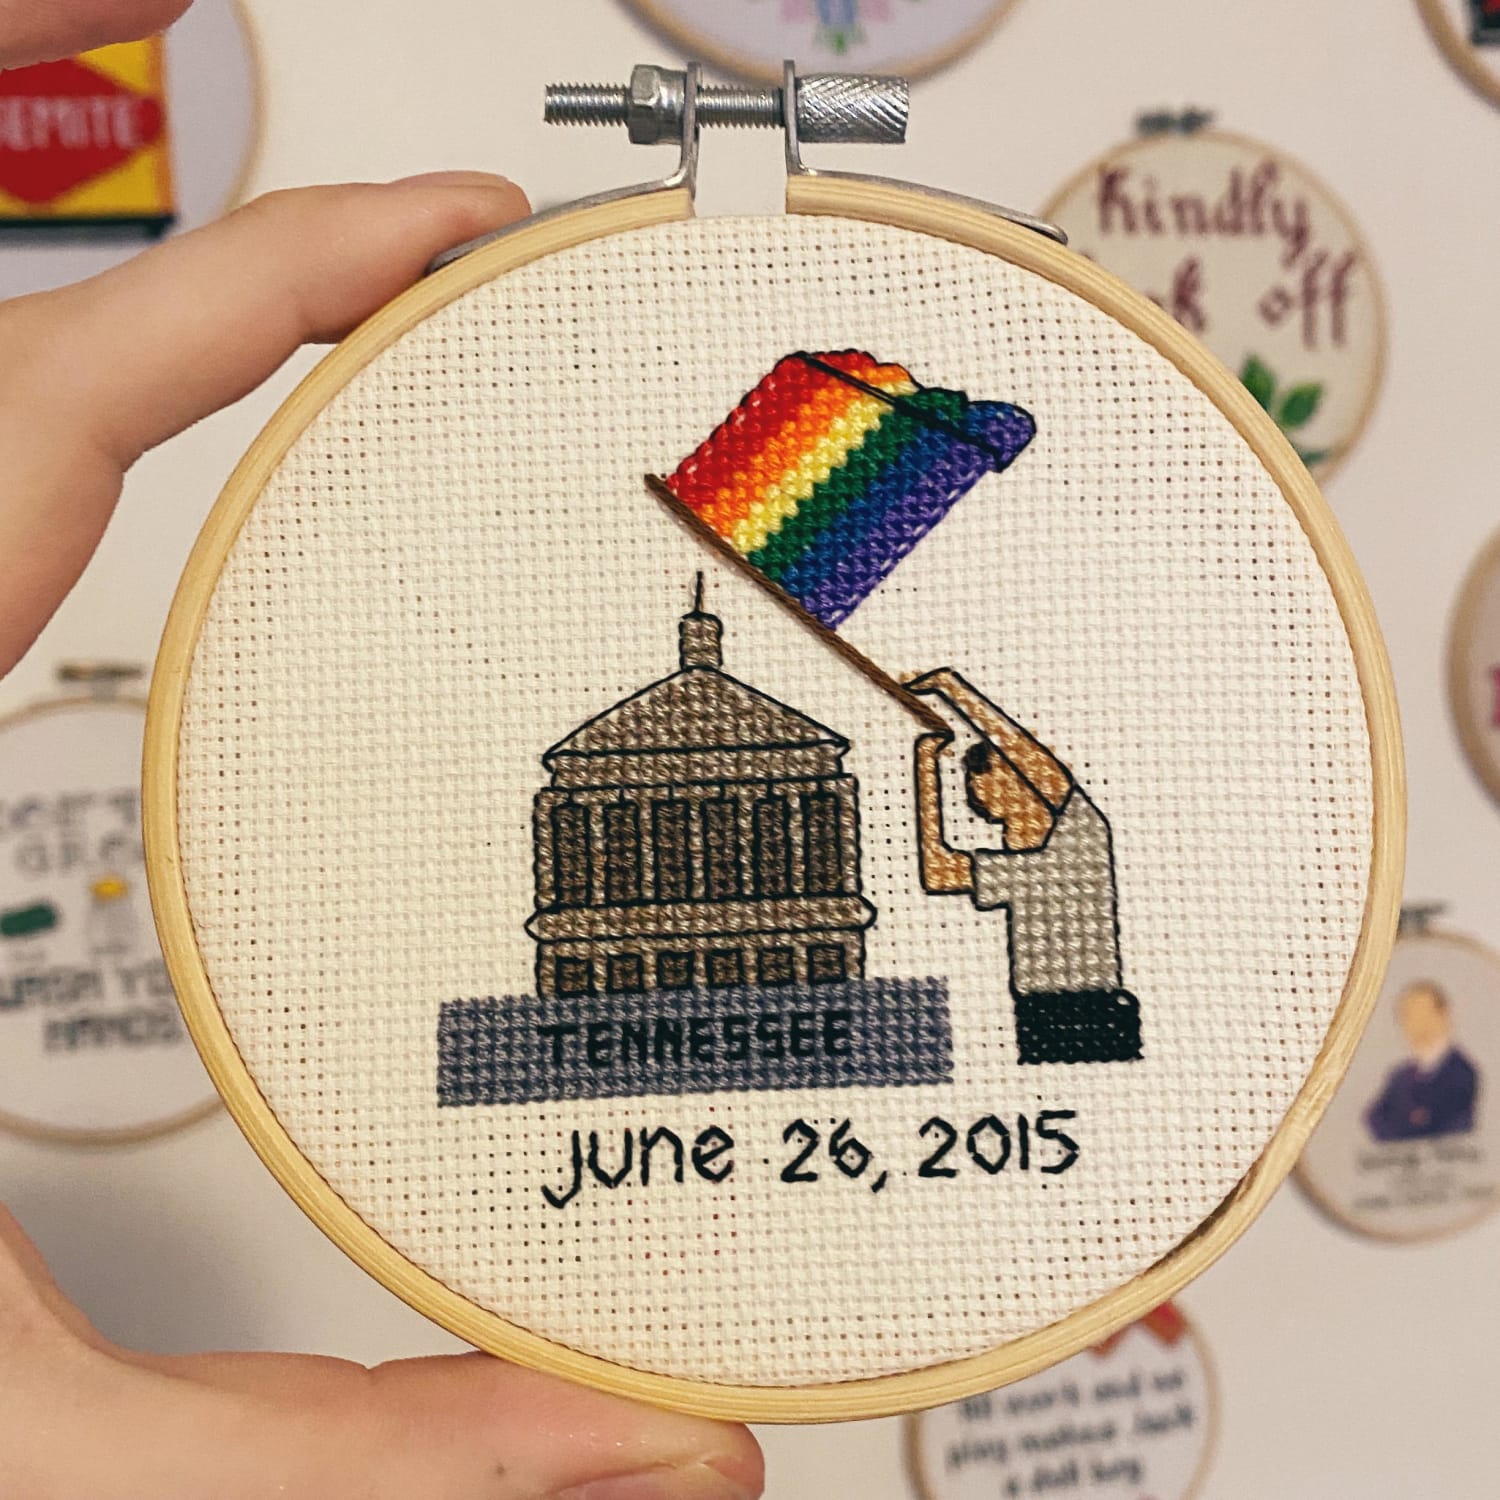 [FO] 6 years ago today the US legalized gay marriage 🏳️‍🌈